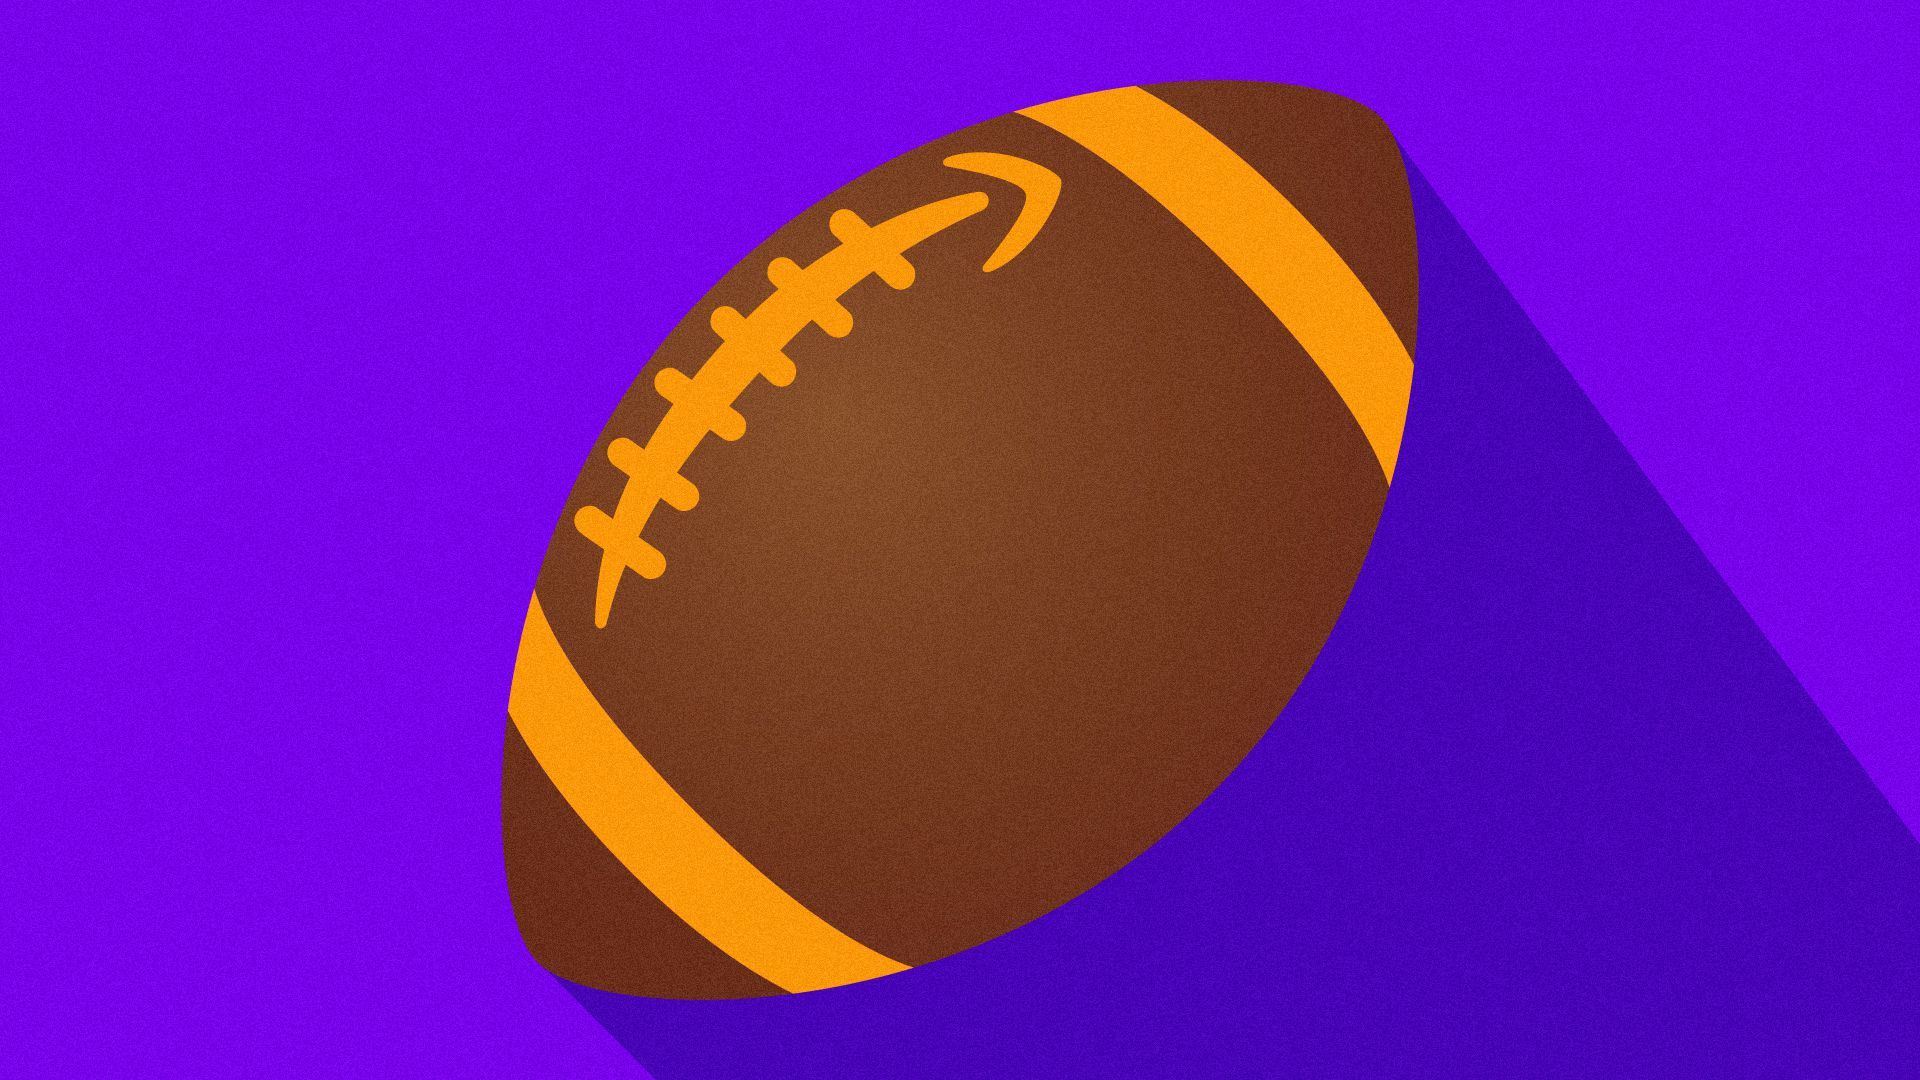 Illustration of a football with Amazon's logo as stitching